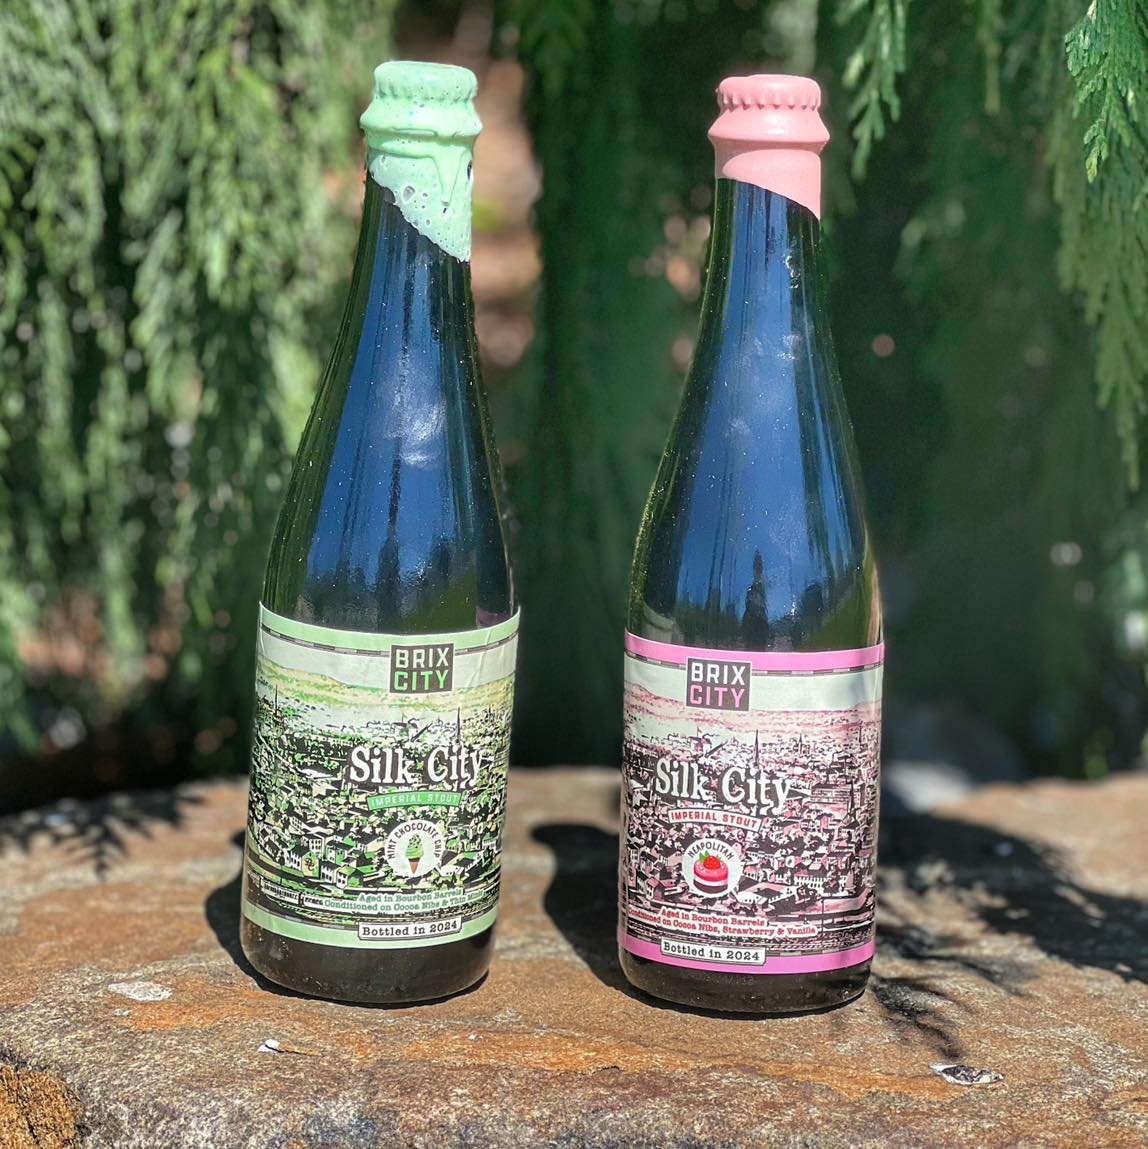 🌟 Brix City Silk City 2024 Bourbon Barrel Aged Bottles are here! Extremely limited, these bottles are available in 500ml for in-house or Packaged Goods To-Go! 🌟 

Silk City (2024) BBA Neapolitan // 10.5% abv // Inspired by a popular combination of 